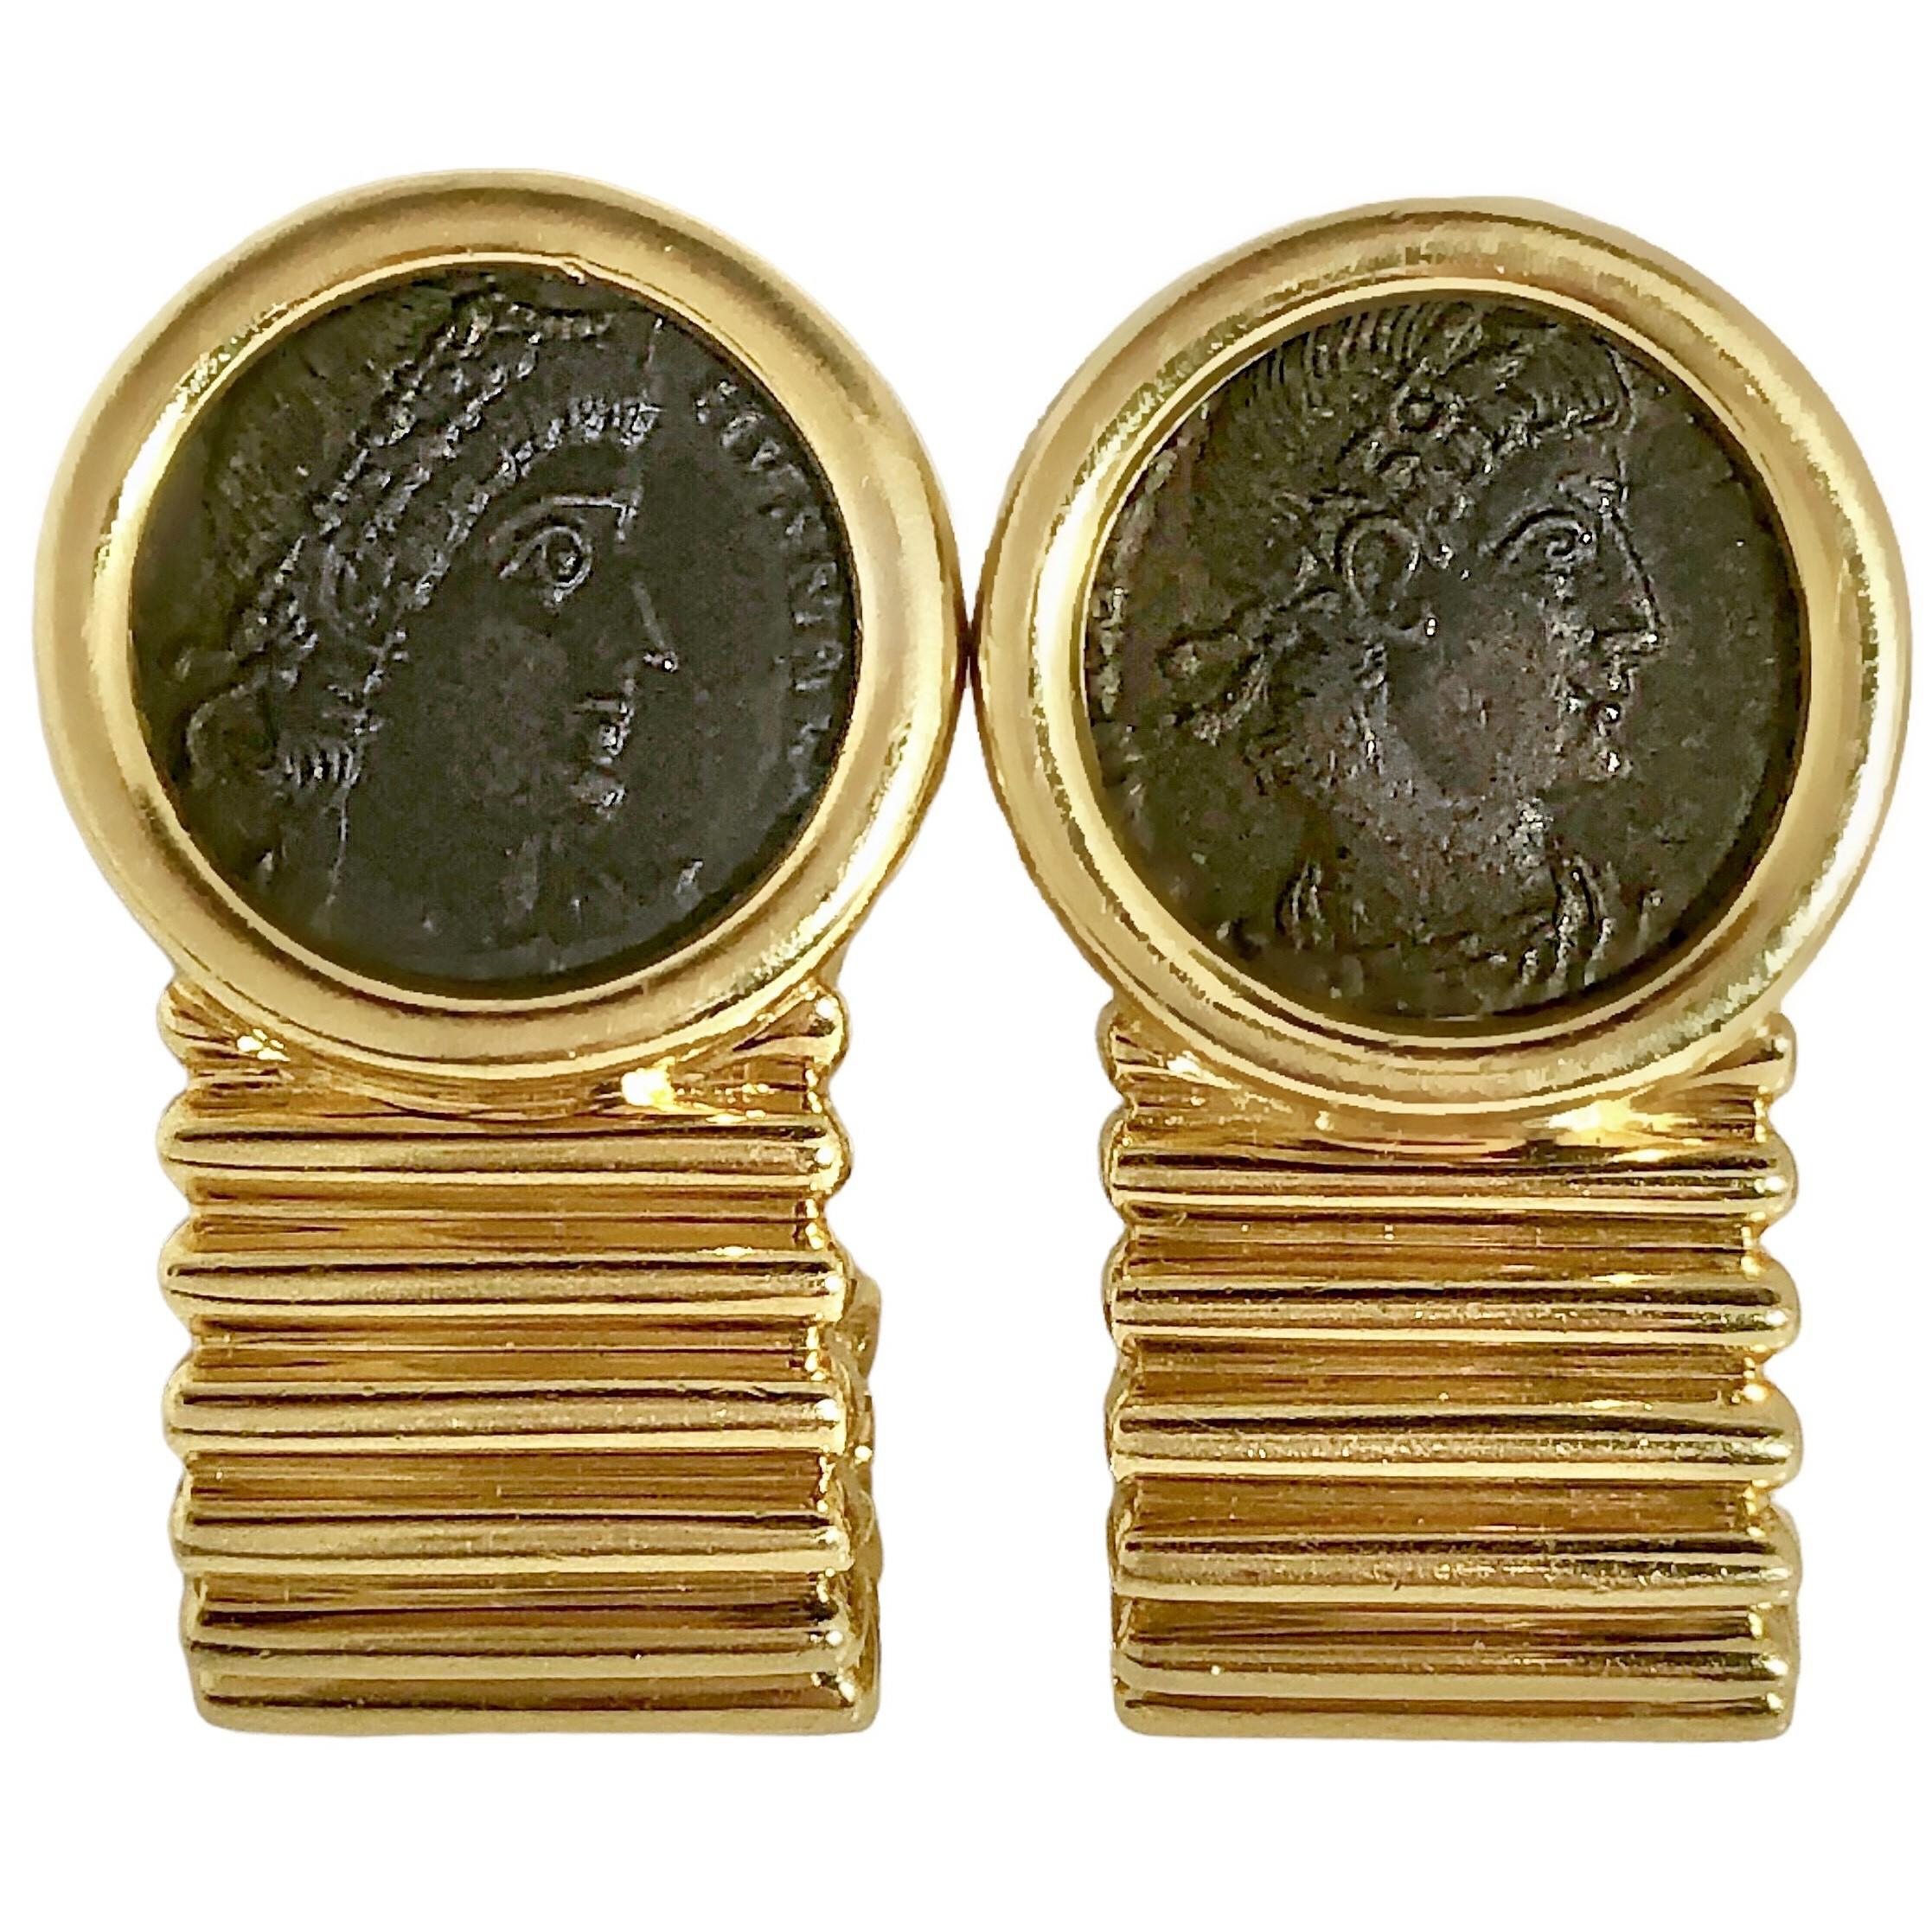 These lovely vintage 18K yellow gold tubogas style earrings are topped with two authentic ancient bronze coins depicting Constantinus the Great from 324AD. Below the bezel set coins are a section of tubogas motif.  Measures 1 1/16 inches in length